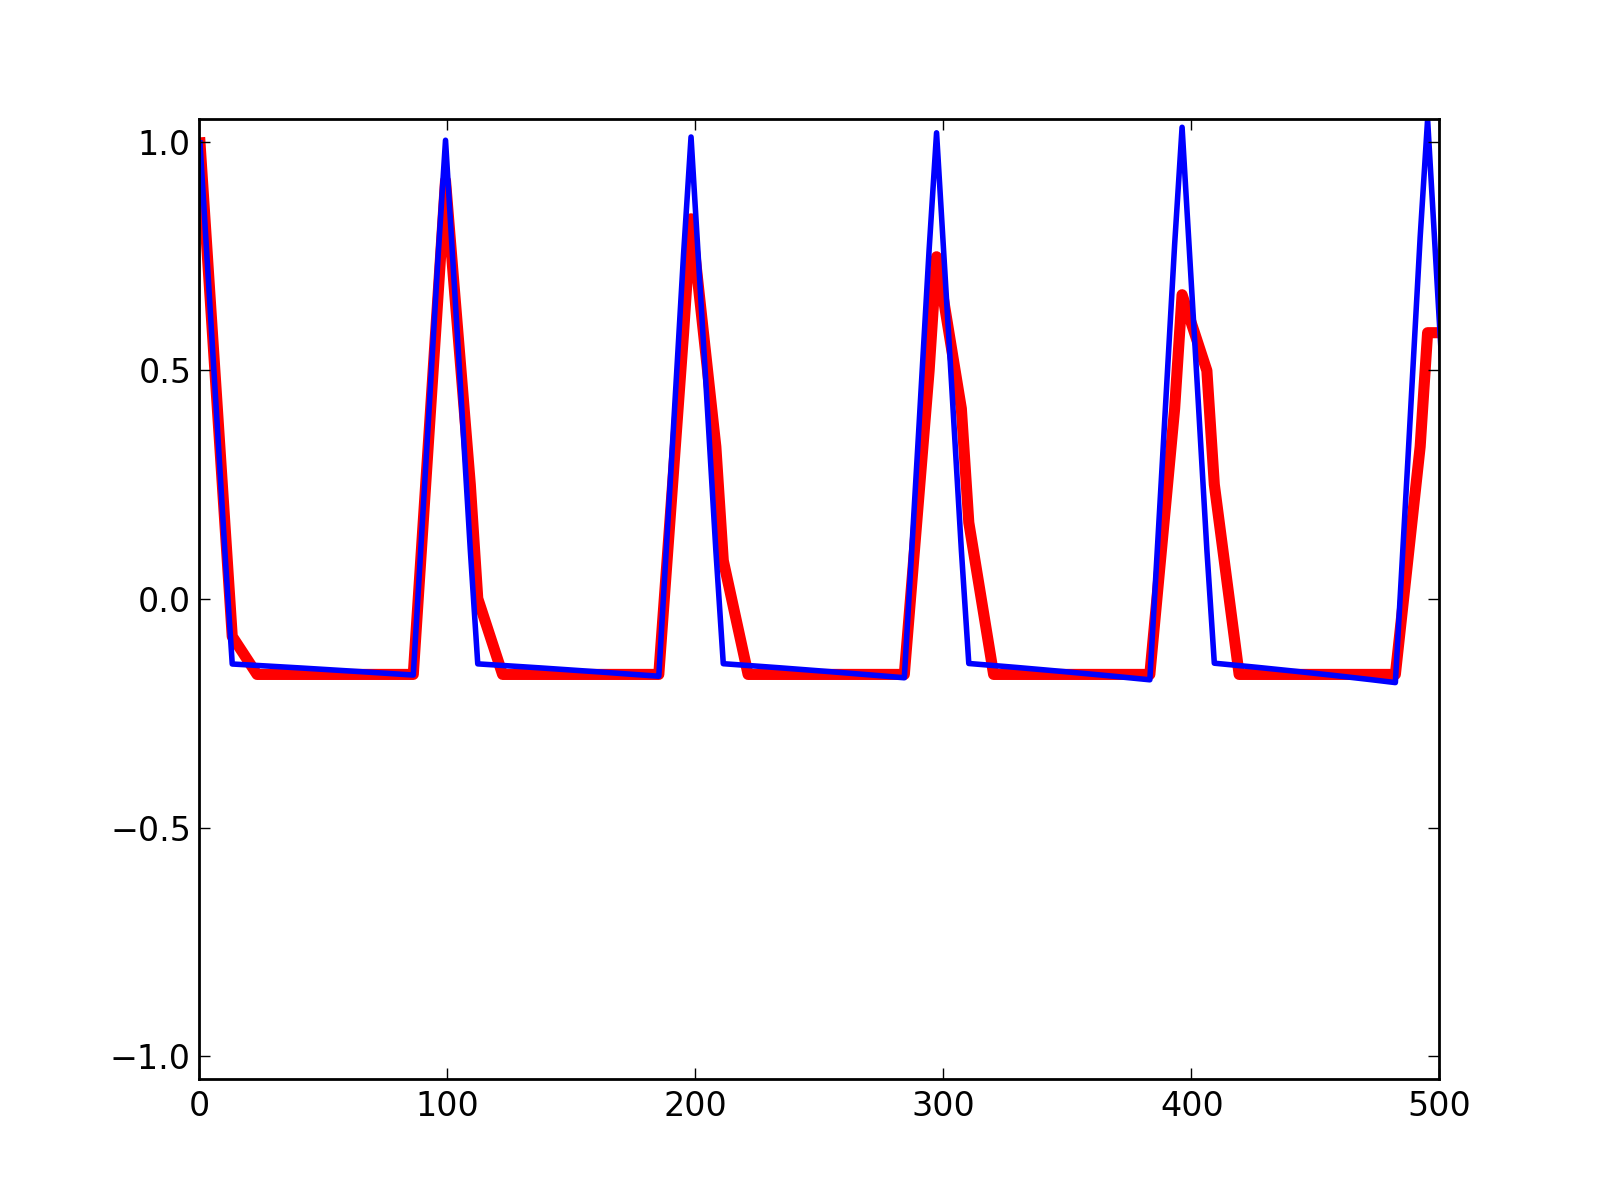 _images/bias_of_cyclic_estimation.png